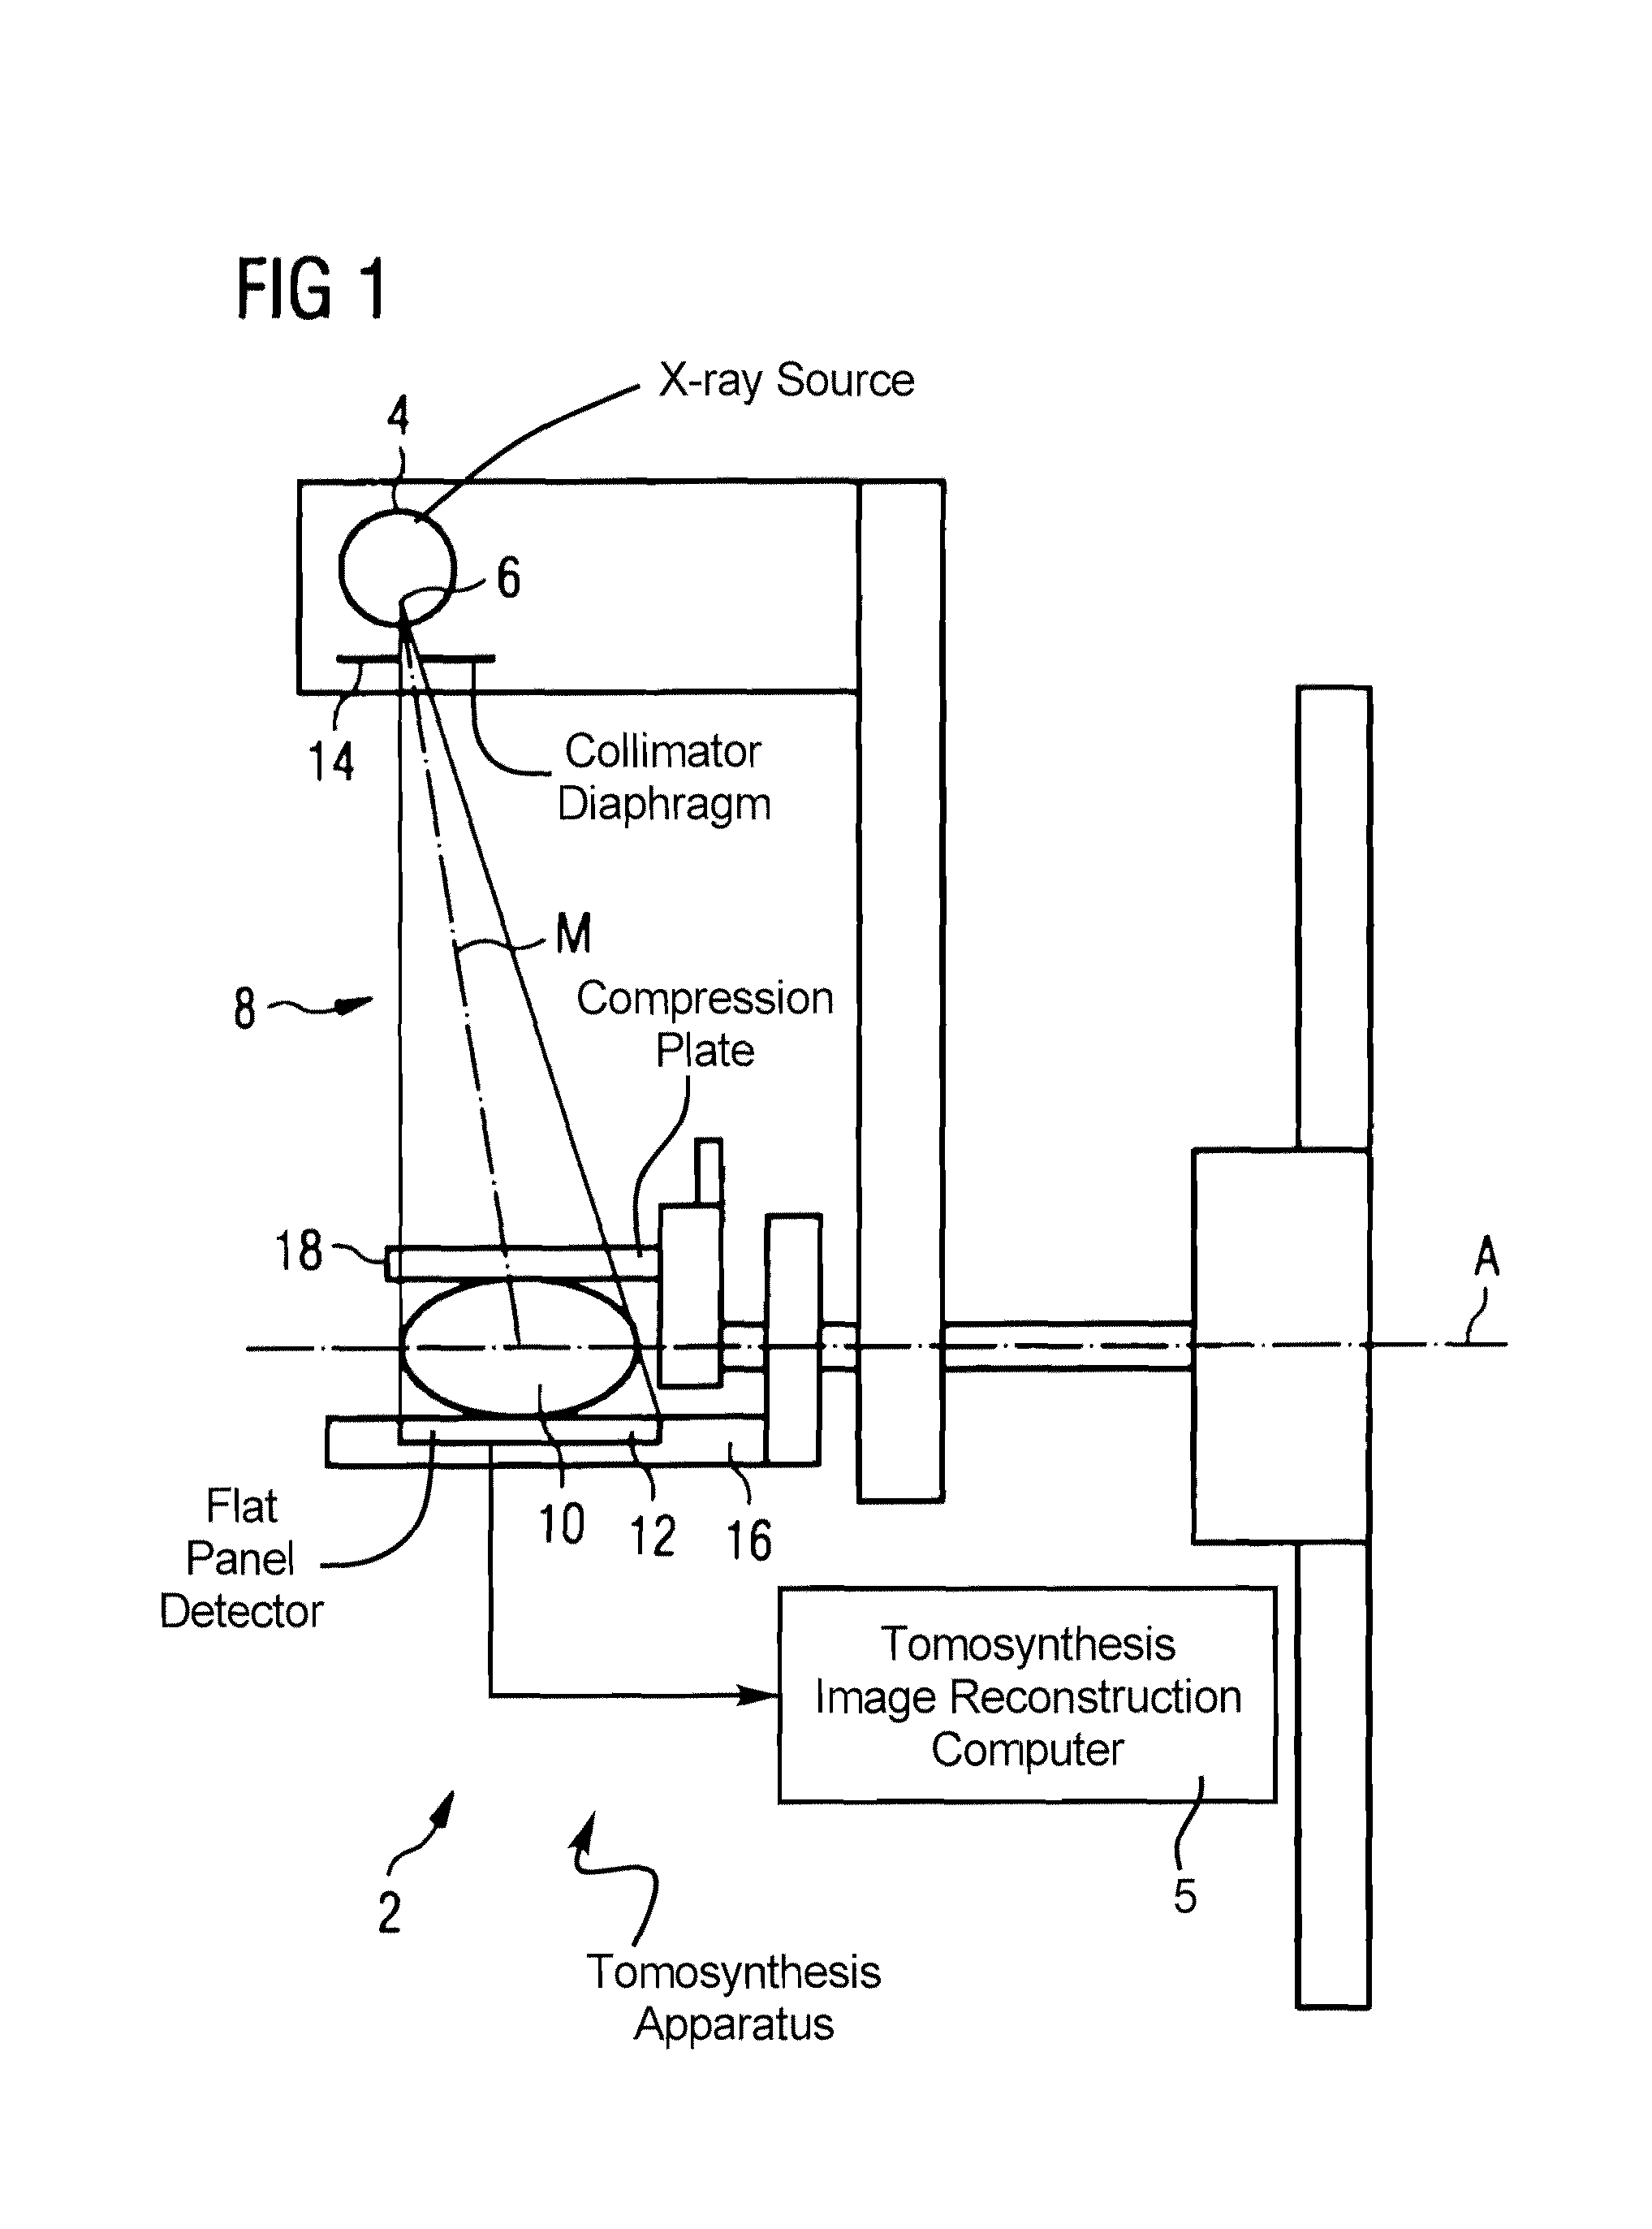 Tomosynthesis apparatus and method to operate a tomosynthesis apparatus